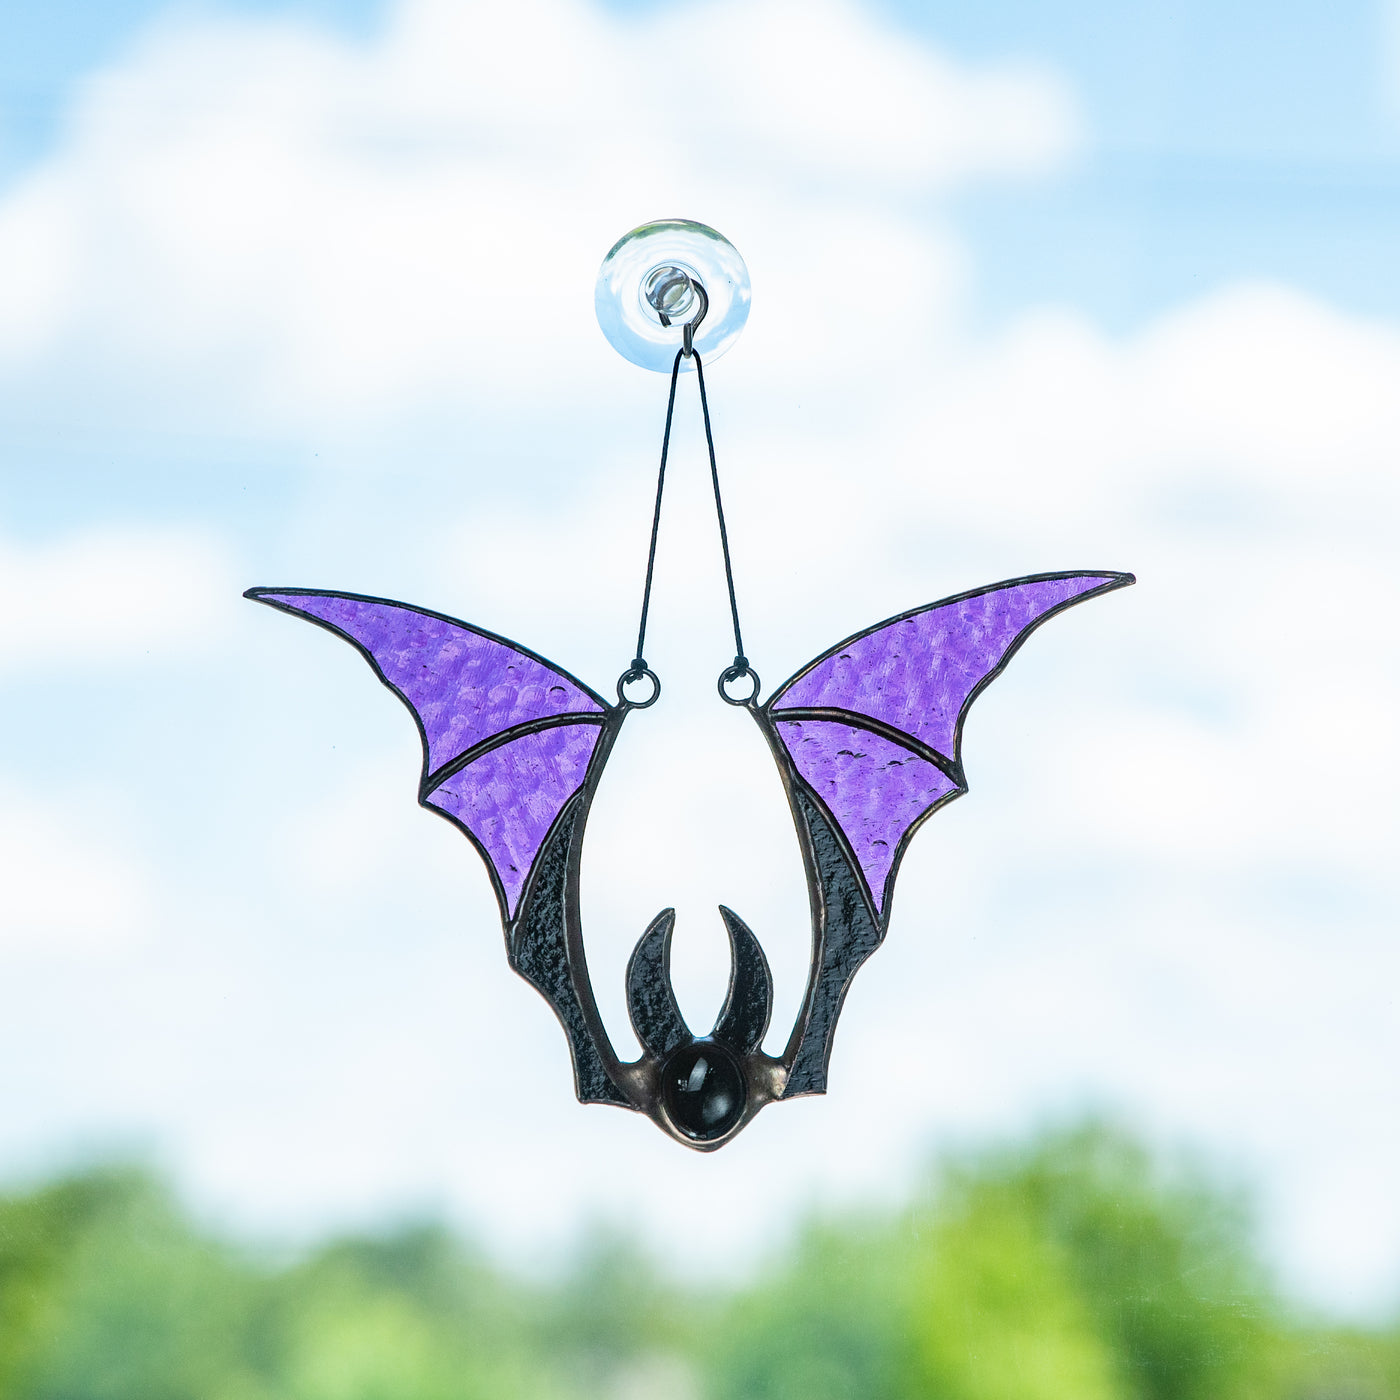 Stained glass purple-winged bat suncatcher for ghastly Halloween decor